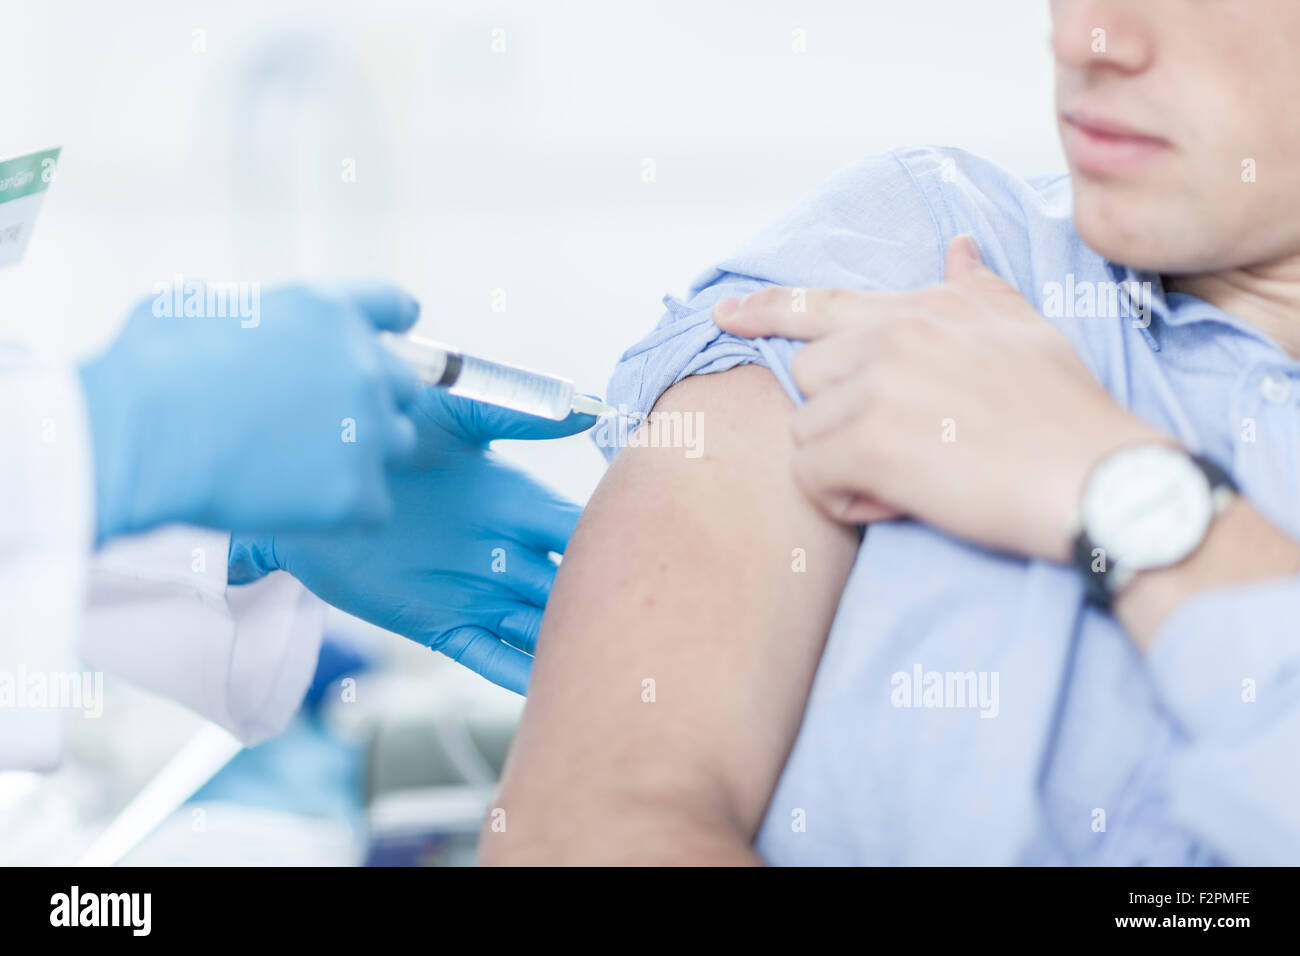 Doctor giving patient injection Stock Photo